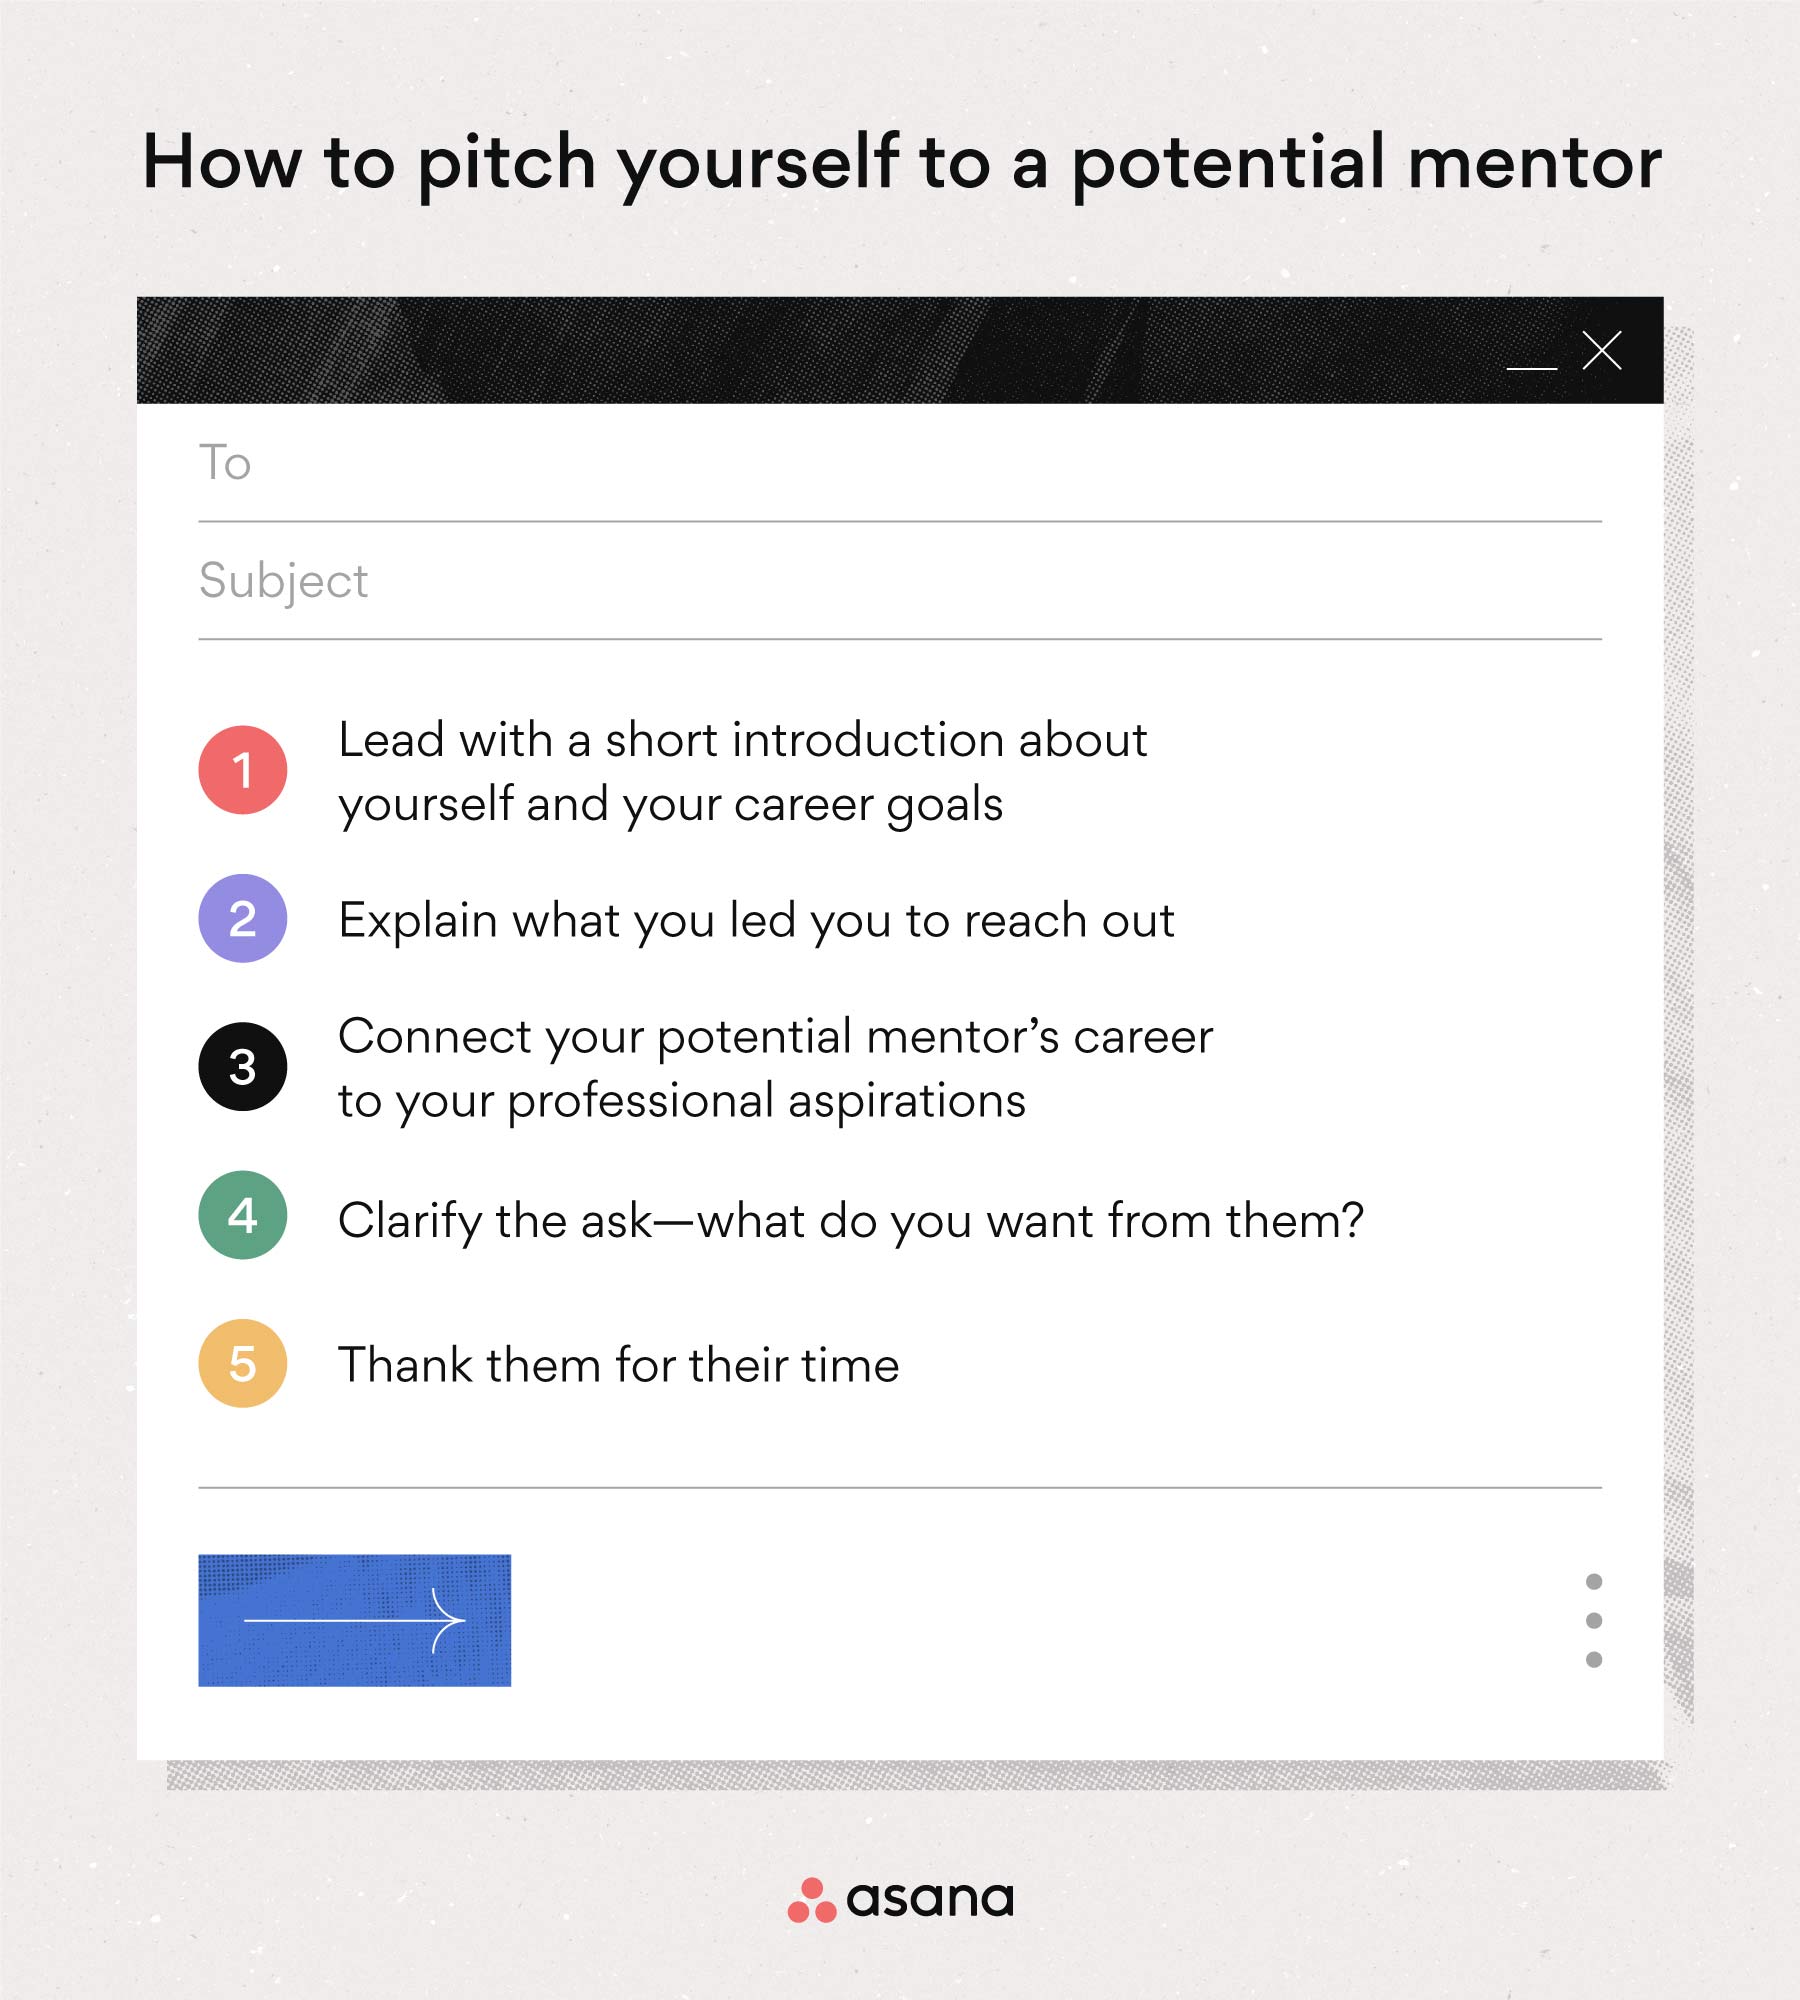 [inline illustration] How to pitch yourself to a potential mentor (infographic)